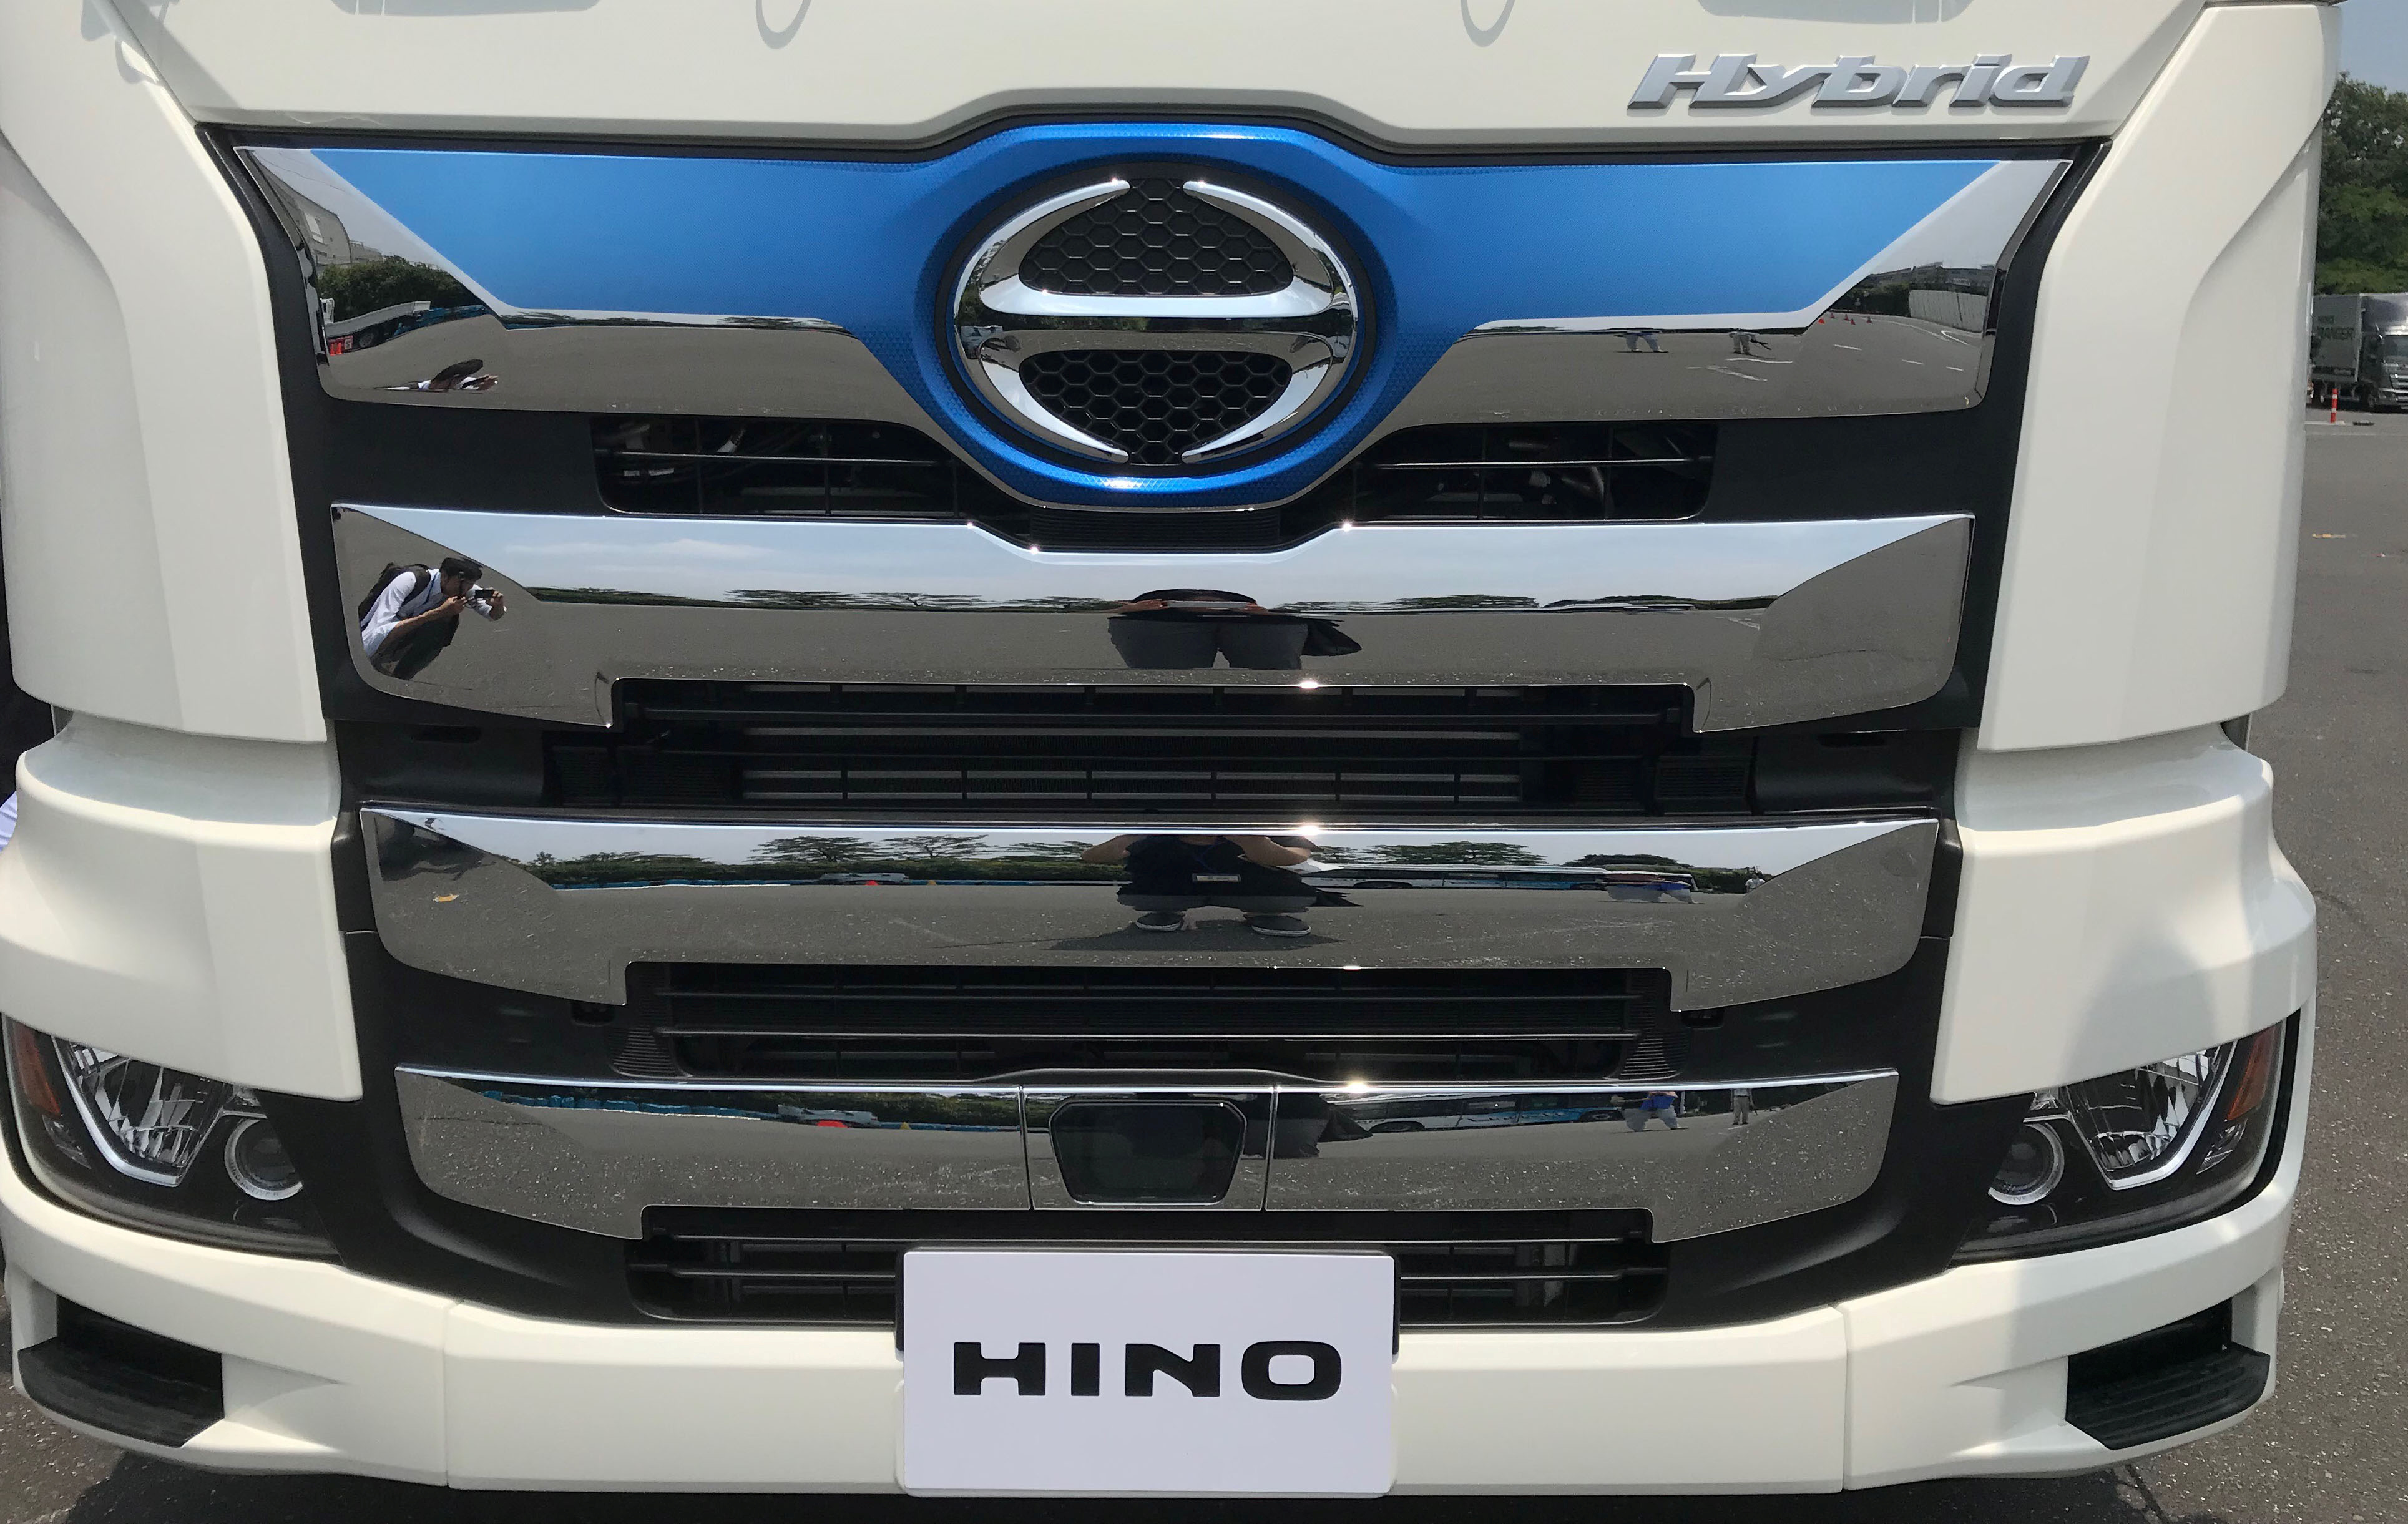 Hino Motors Ltd displays its new Hybrid Profia, a diesel-hybrid version of its large commercial truck model at its R&D Centre at Hino in Tokyo